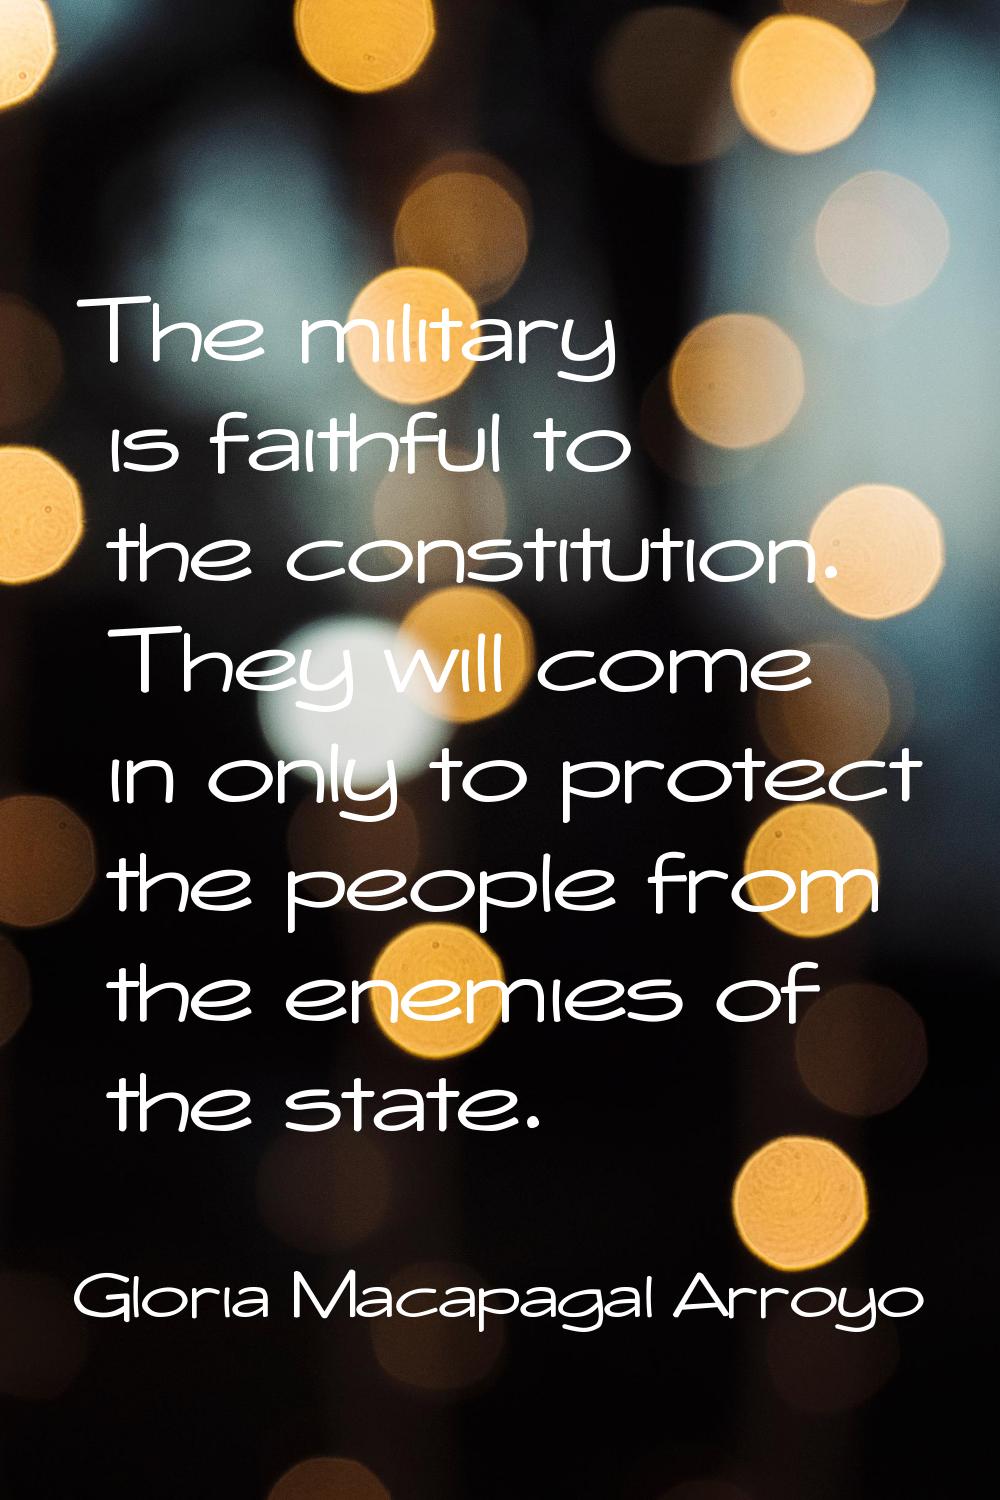 The military is faithful to the constitution. They will come in only to protect the people from the